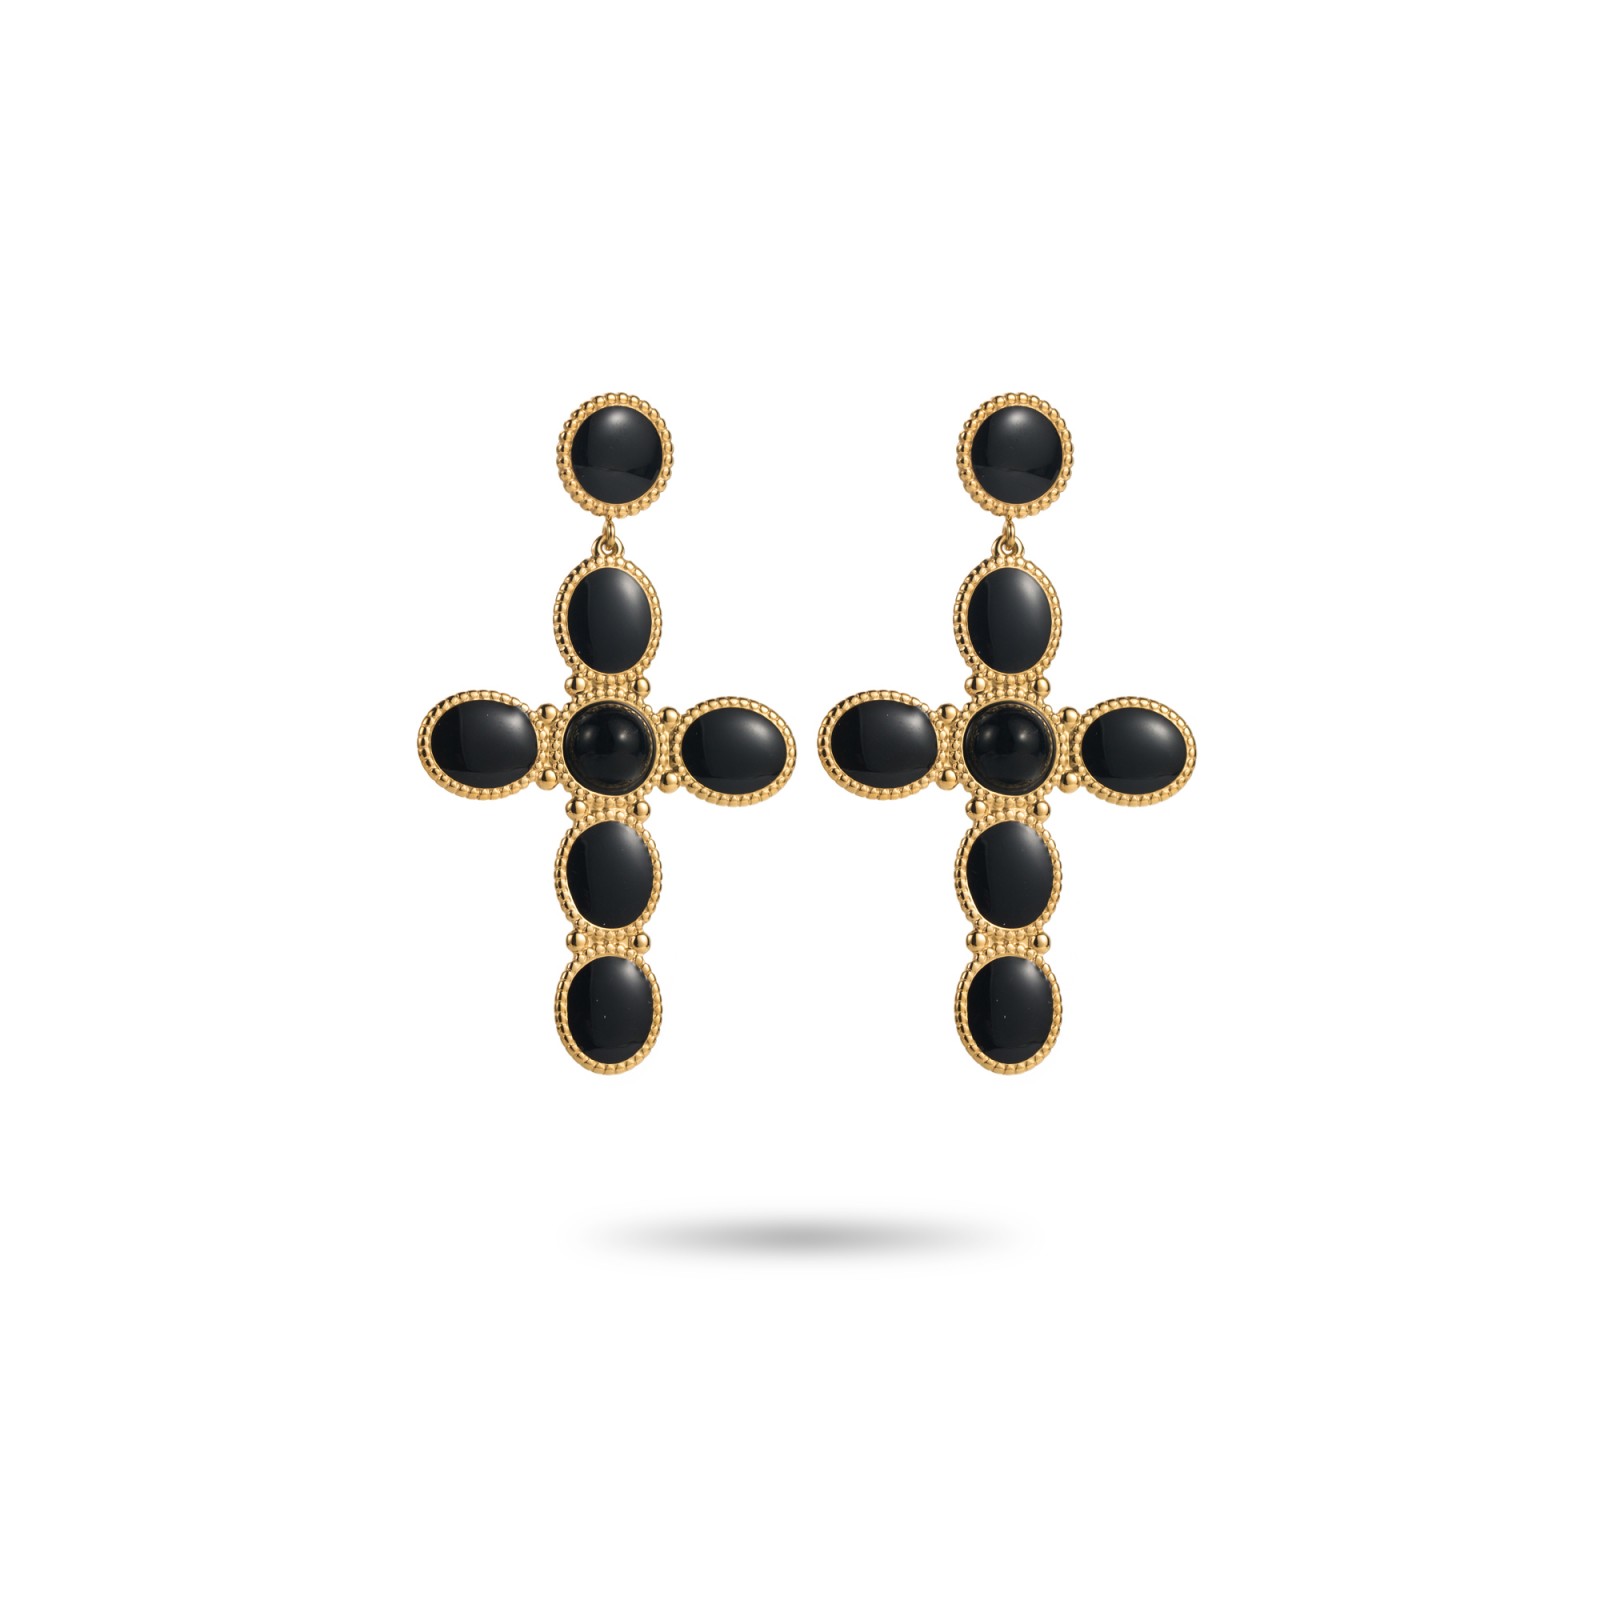 Colorful Cross Earrings with Millegrains Details Color:Black